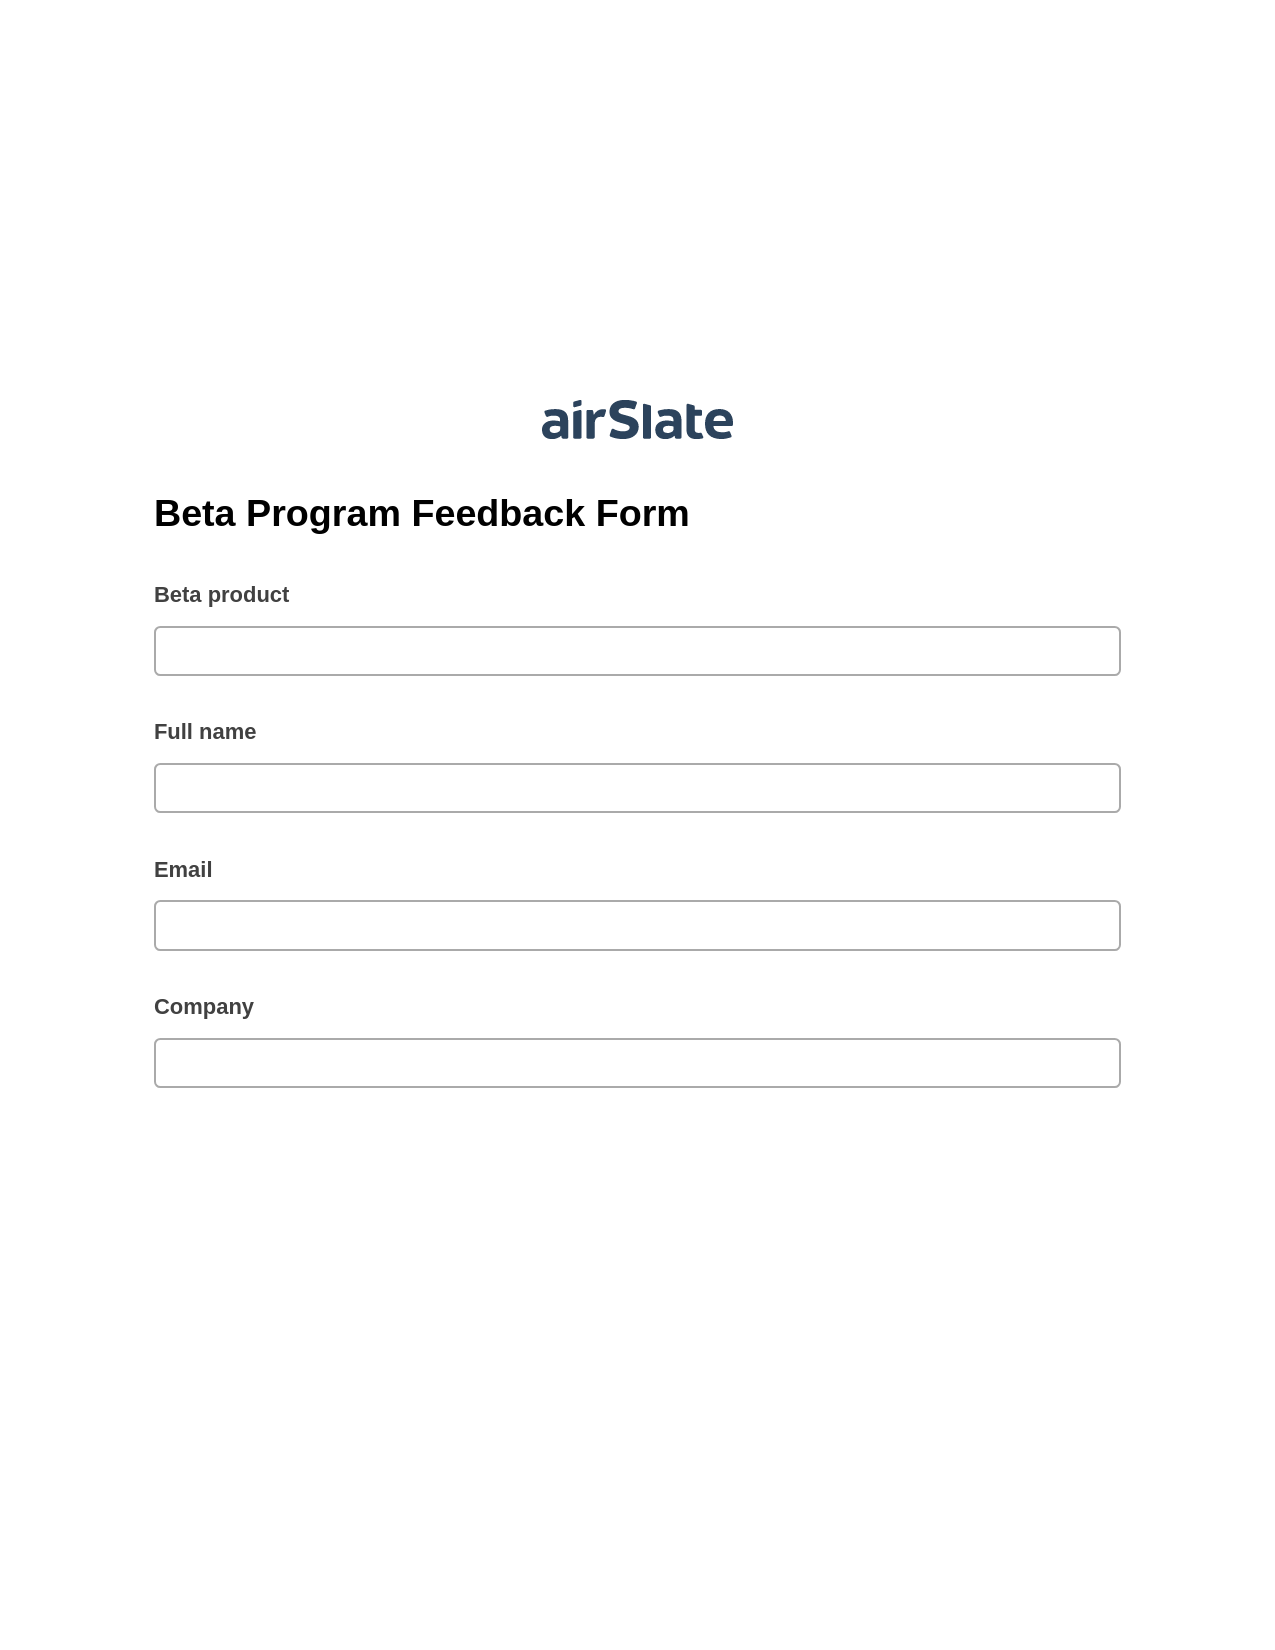 Beta Program Feedback Form Pre-fill Dropdown from Airtable, Open as Role Bot, Export to Google Sheet Bot